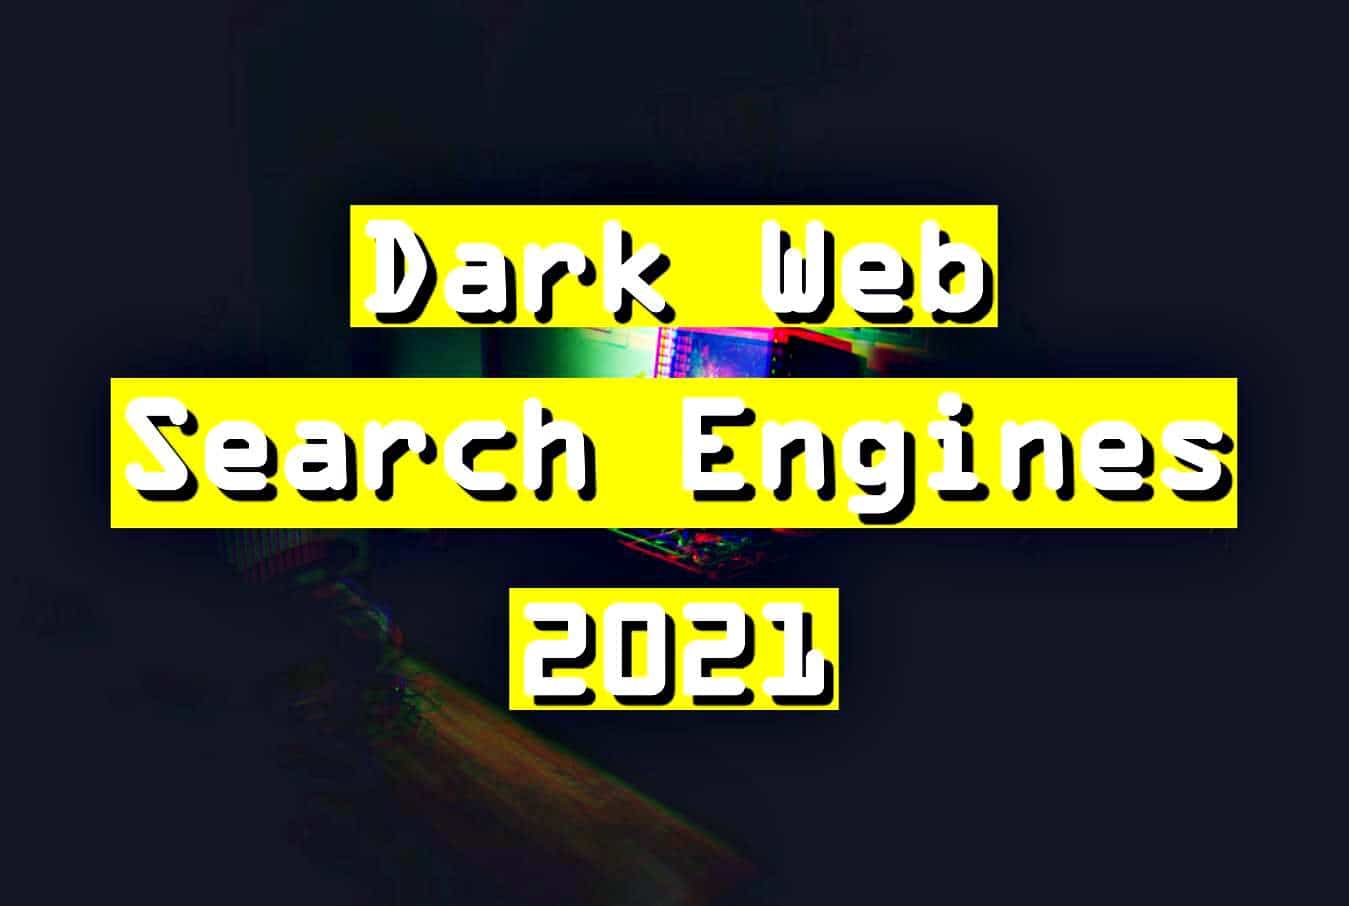 Latest Top 5 Dark Web Search Engines for 2021